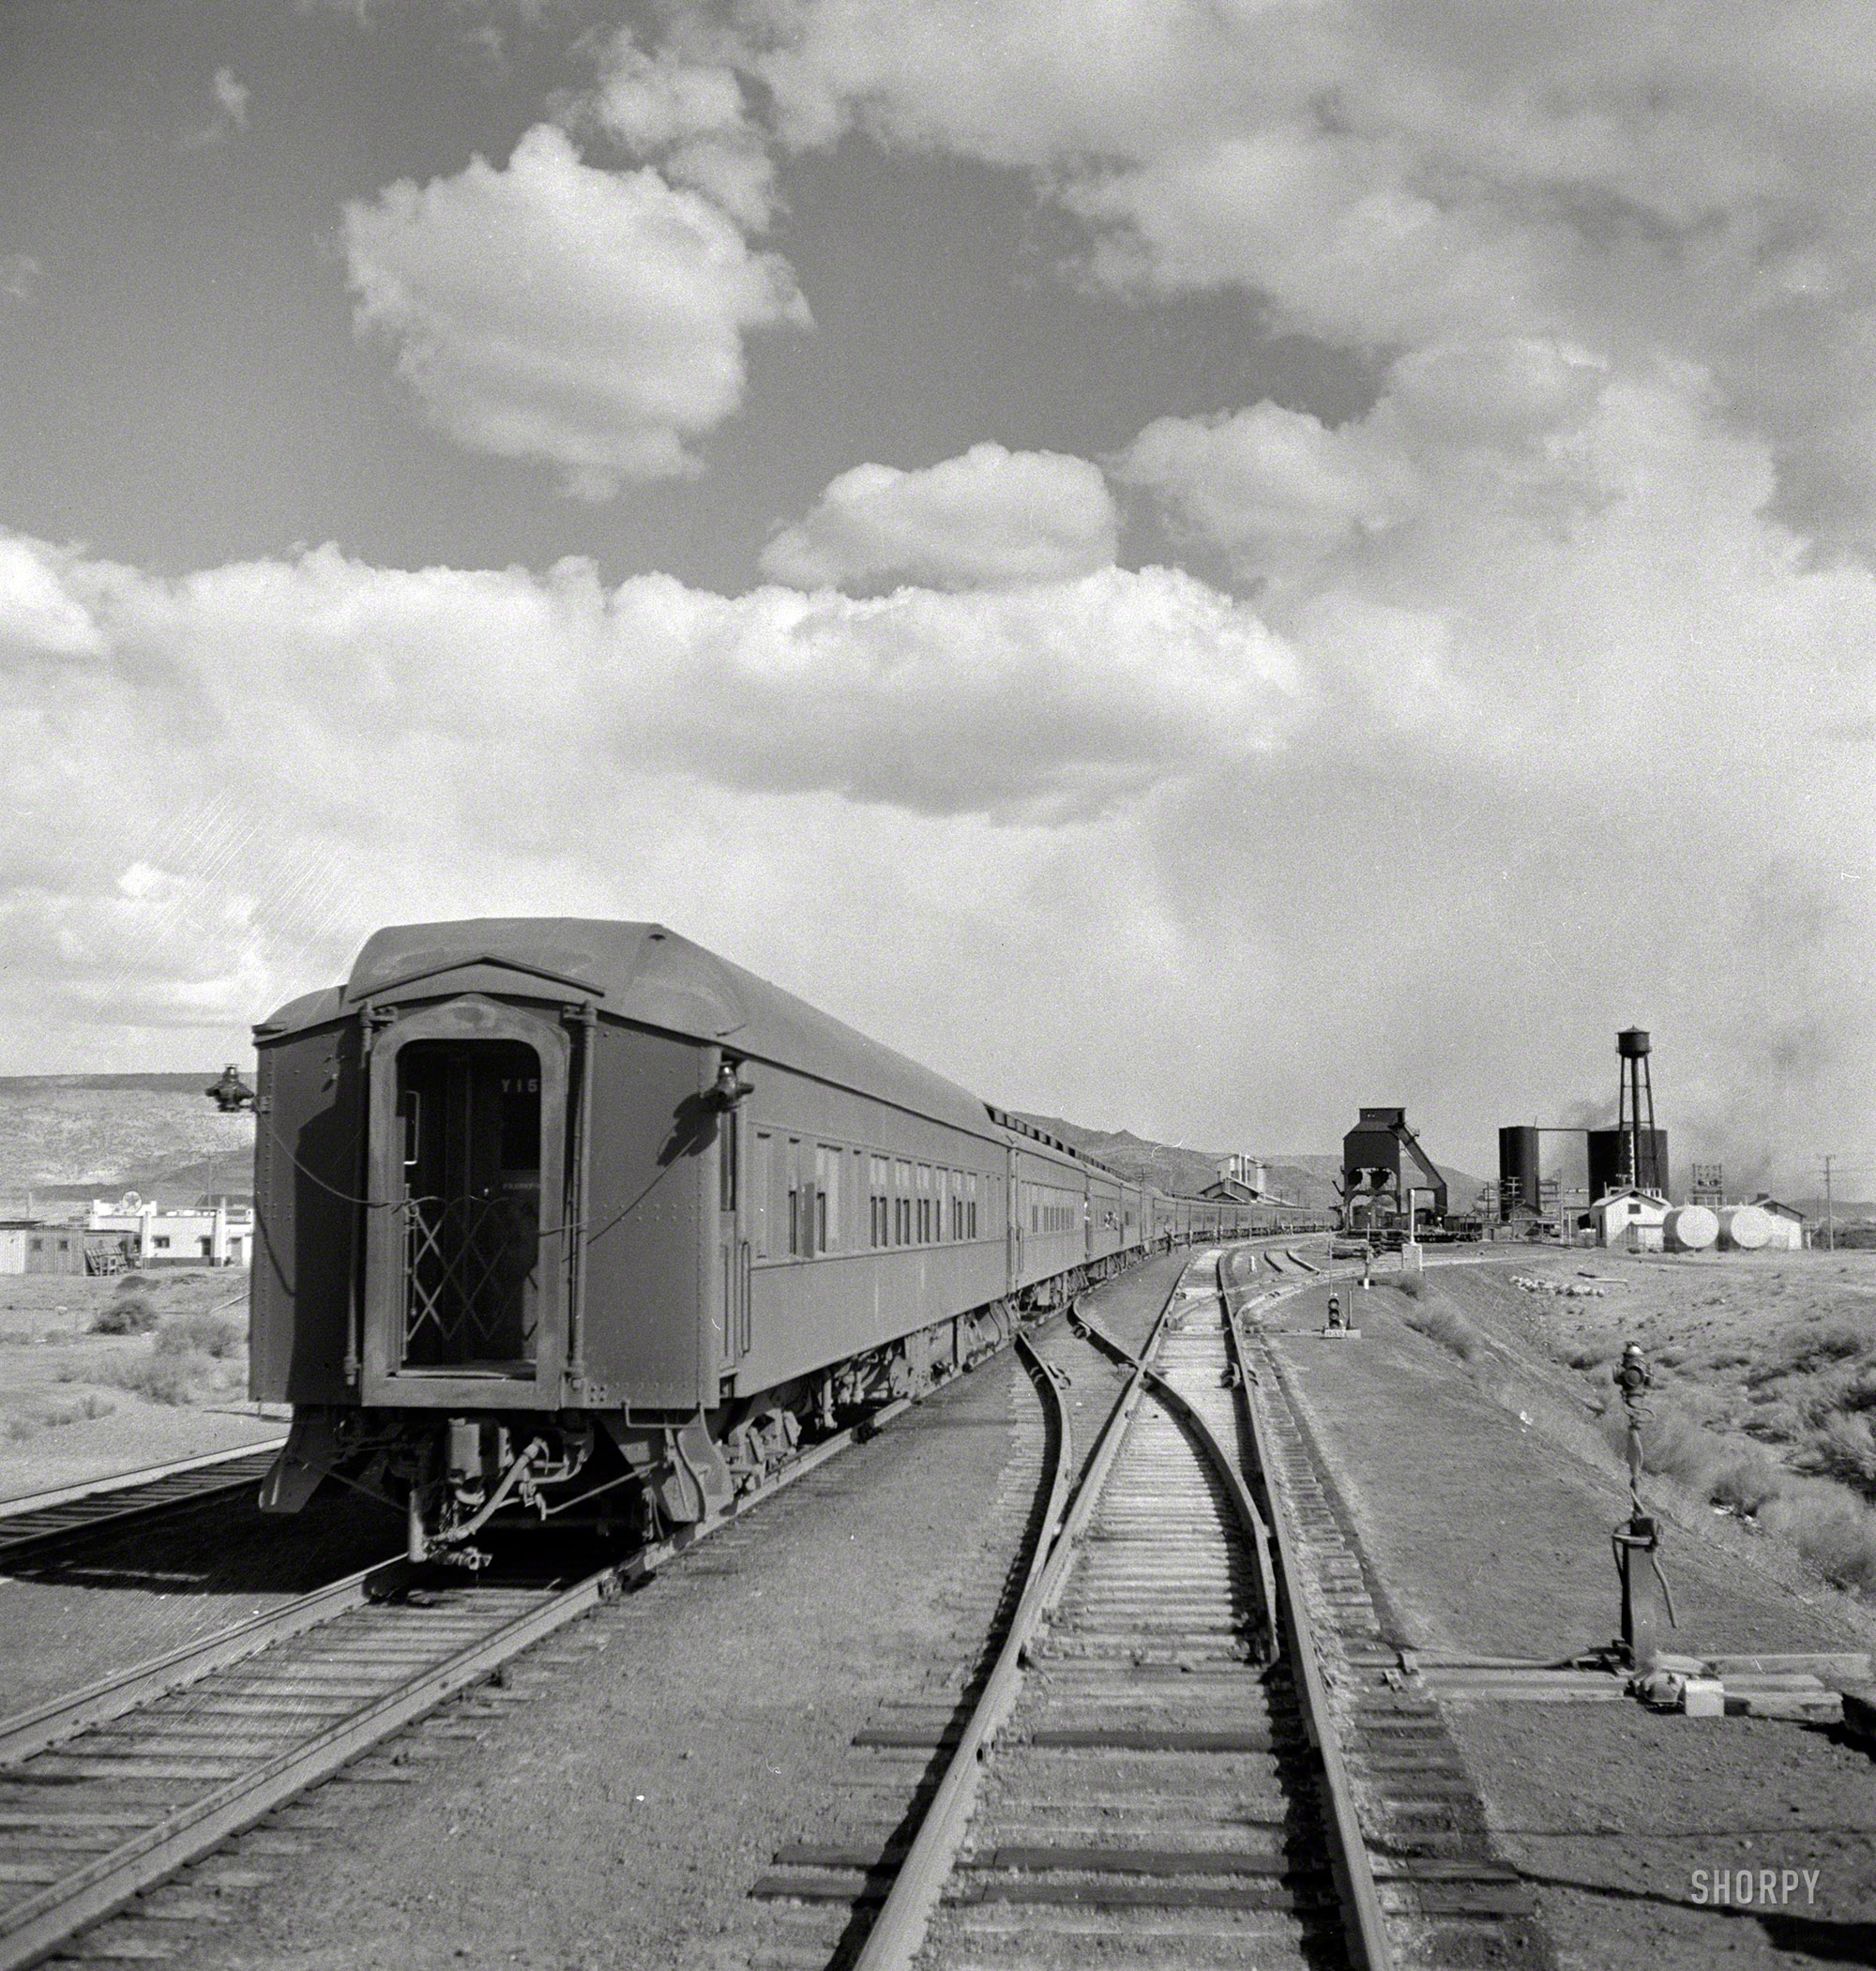 March 1943. "Grants, New Mexico. Passing a troop train stopping for coal and water on the Atchison, Topeka & Santa Fe between Belen and Gallup." Photo by Jack Delano for the Office of War Information. View full size.